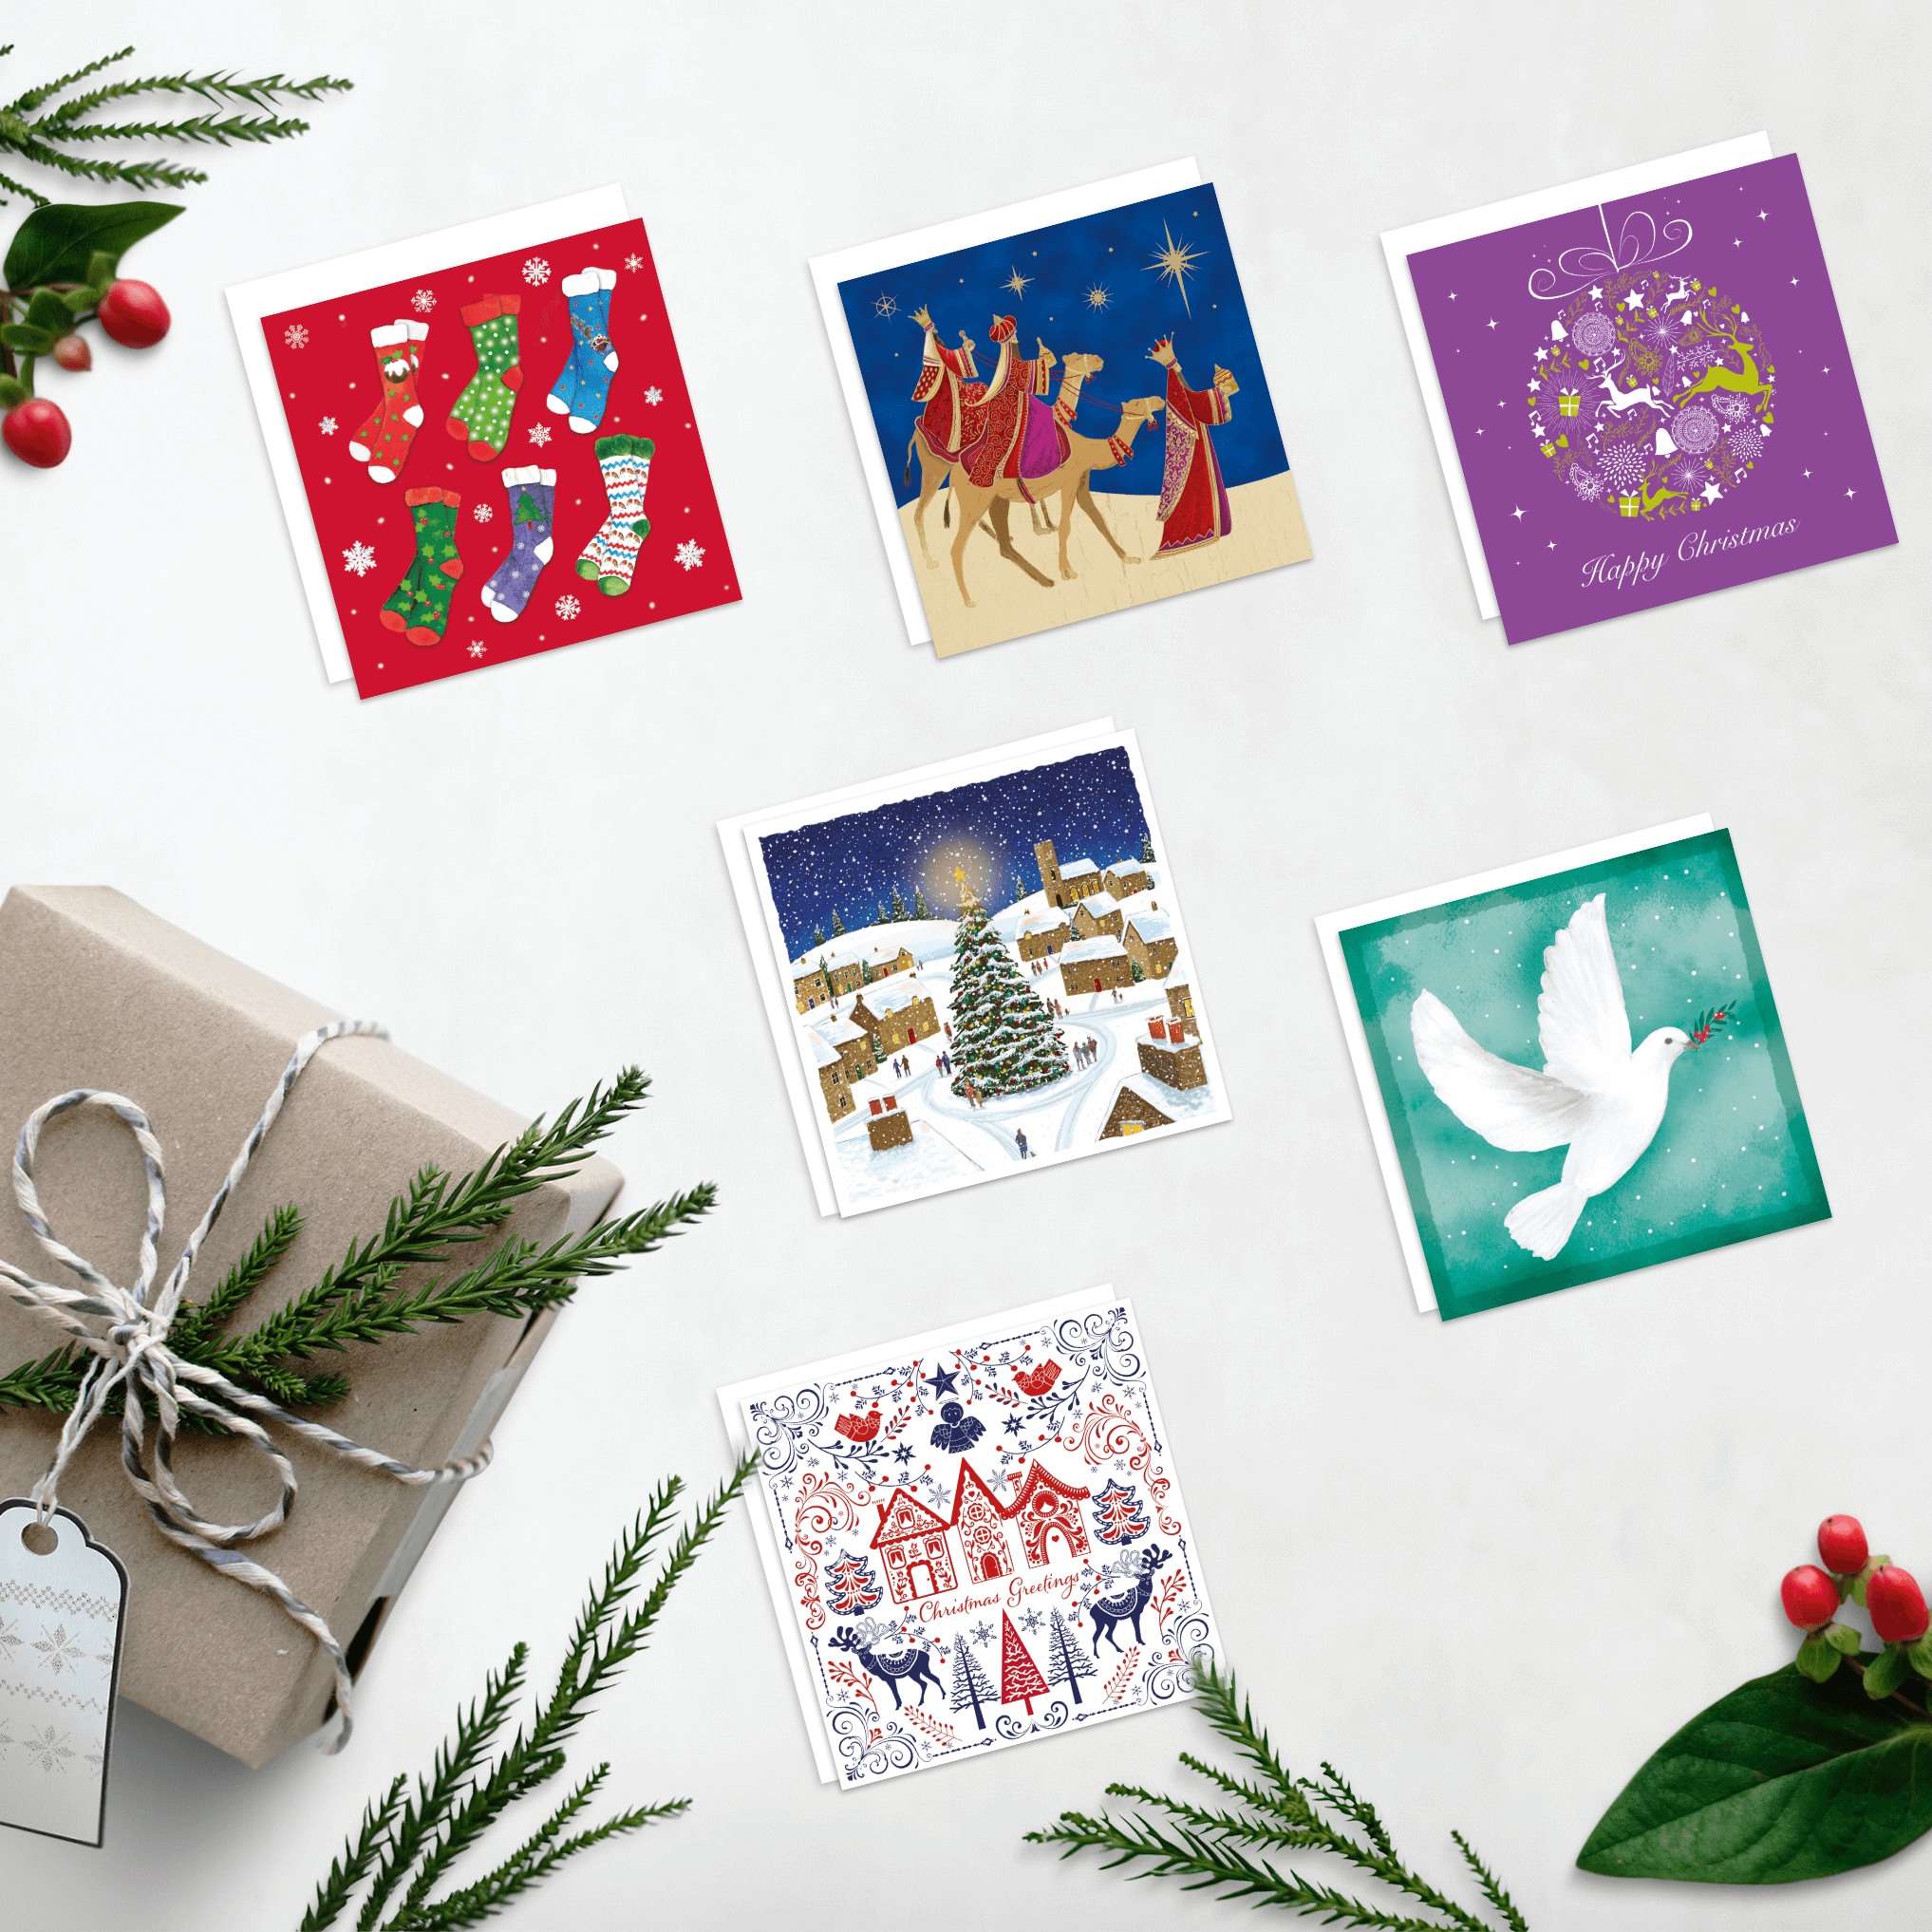 Festive scene with Christmas card designs with a present and greenery